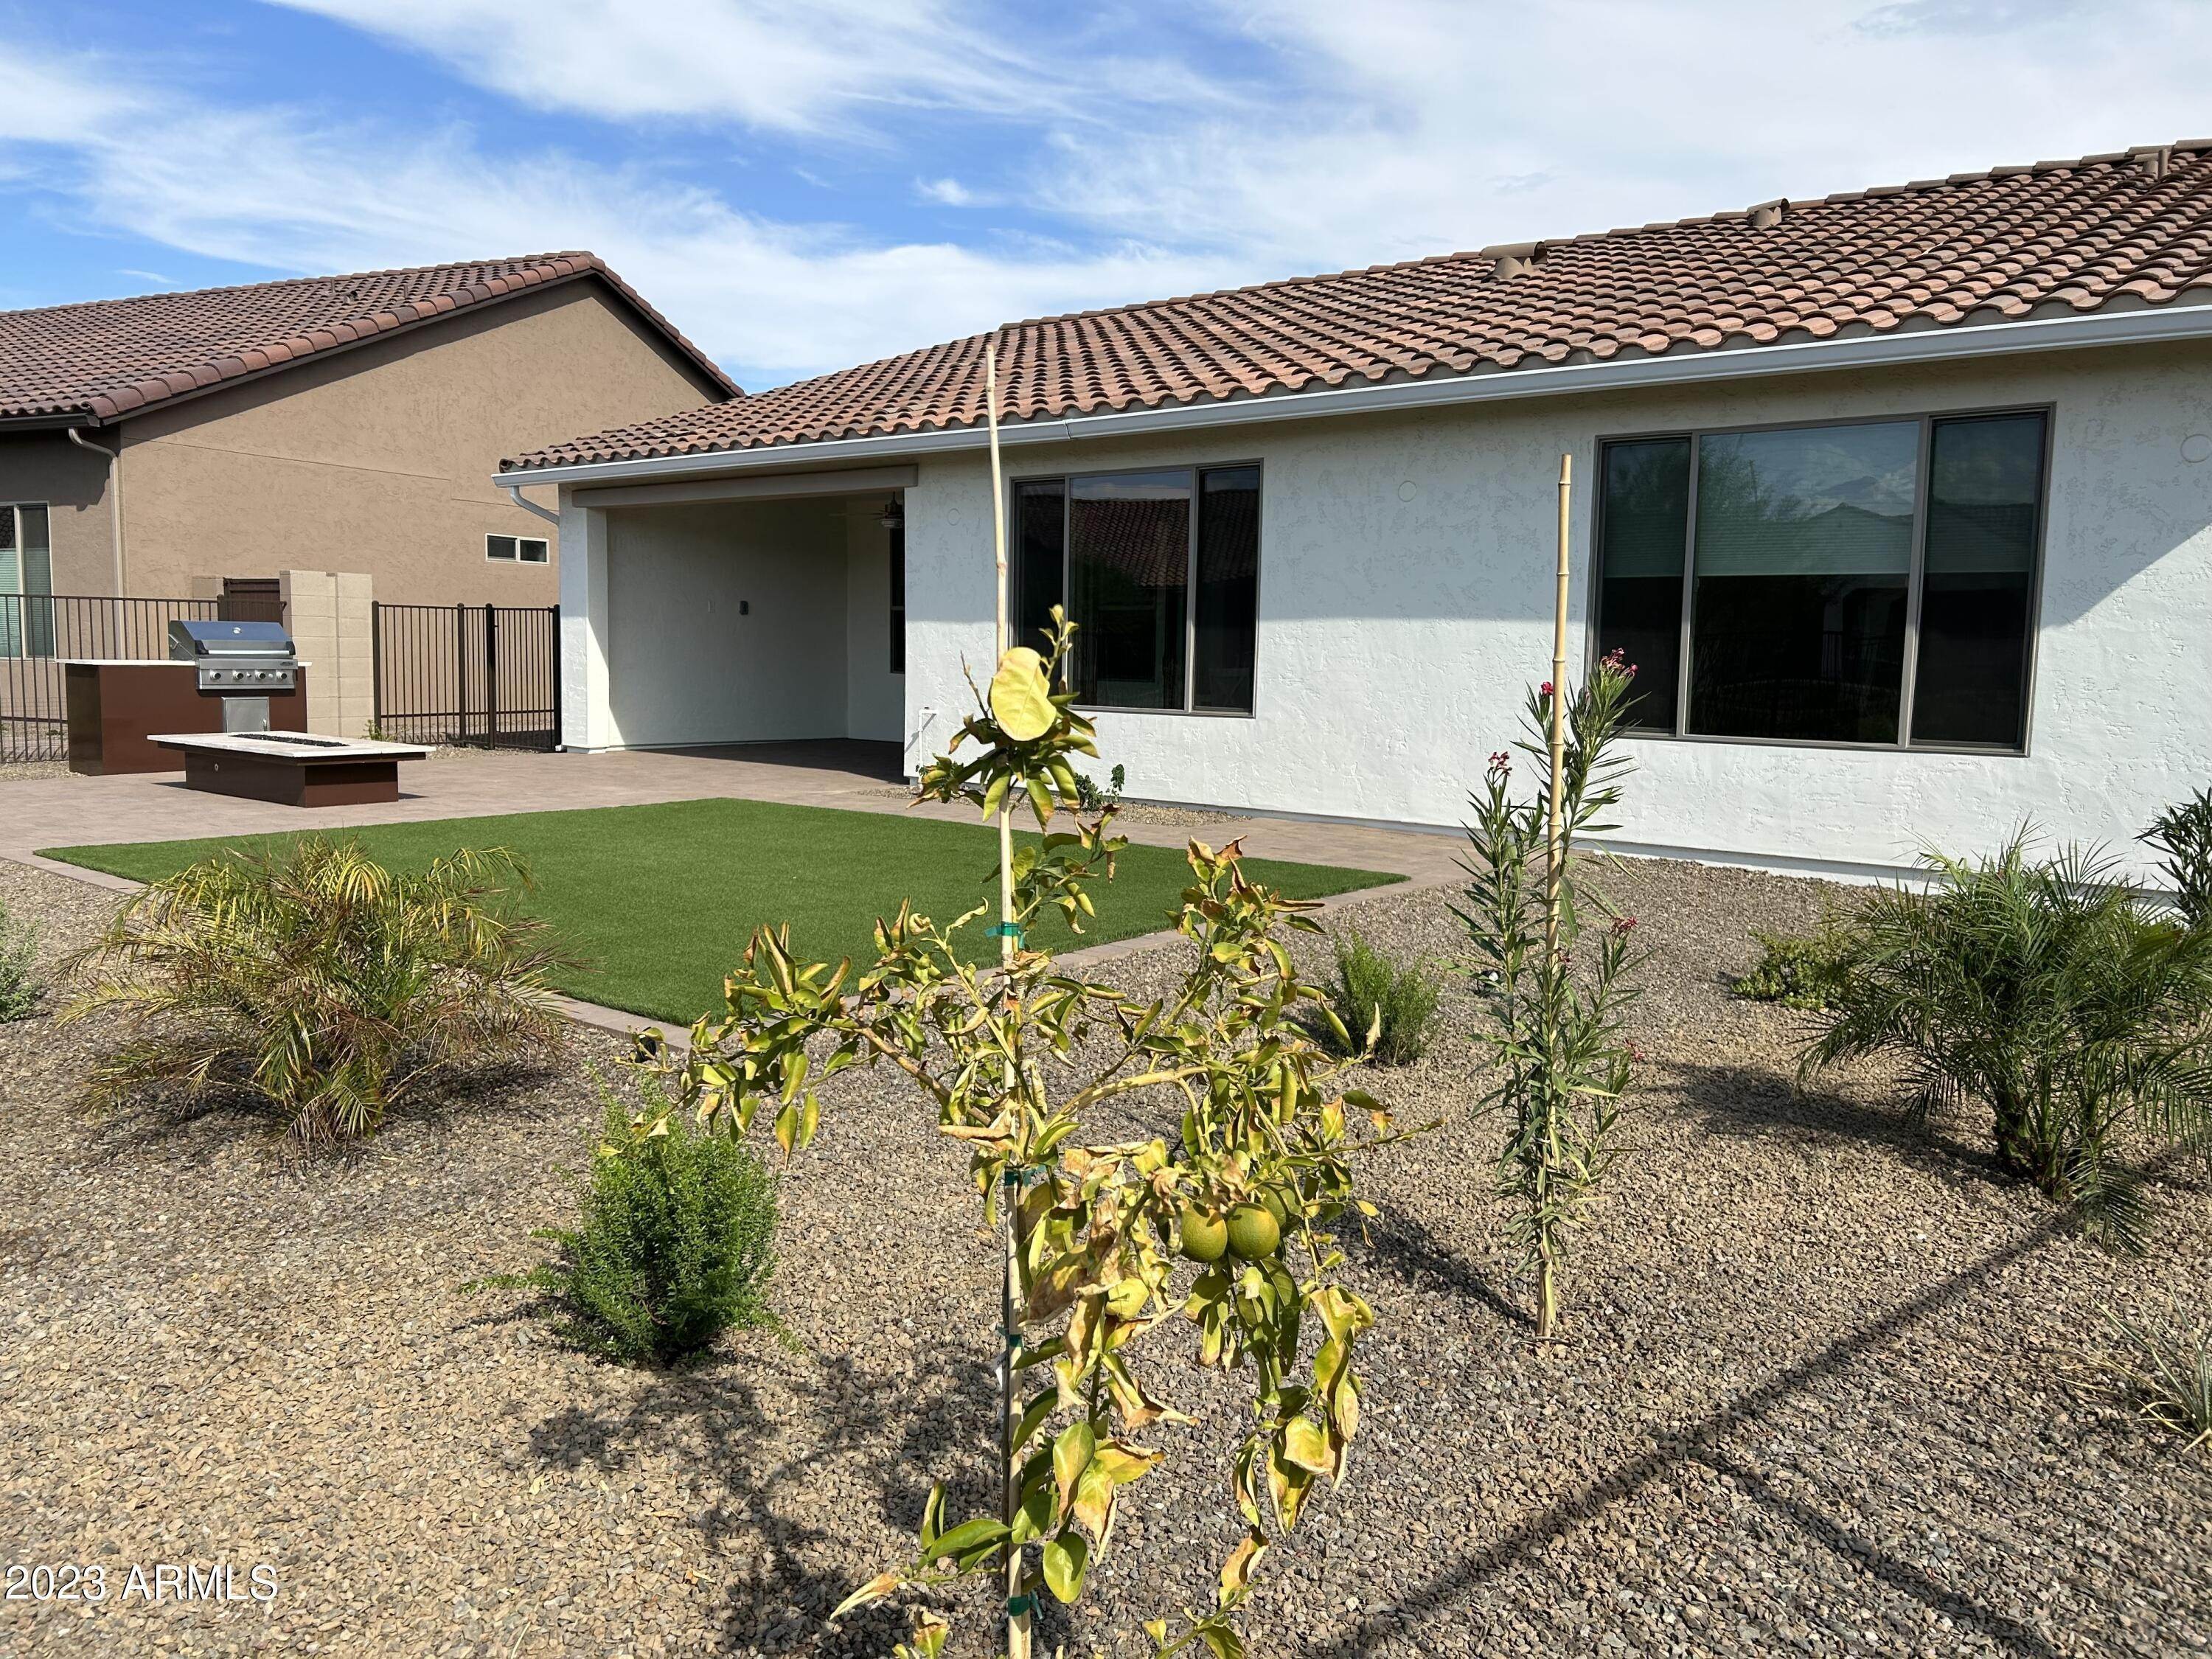 37. Single Family for Sale at Goodyear, AZ 85395